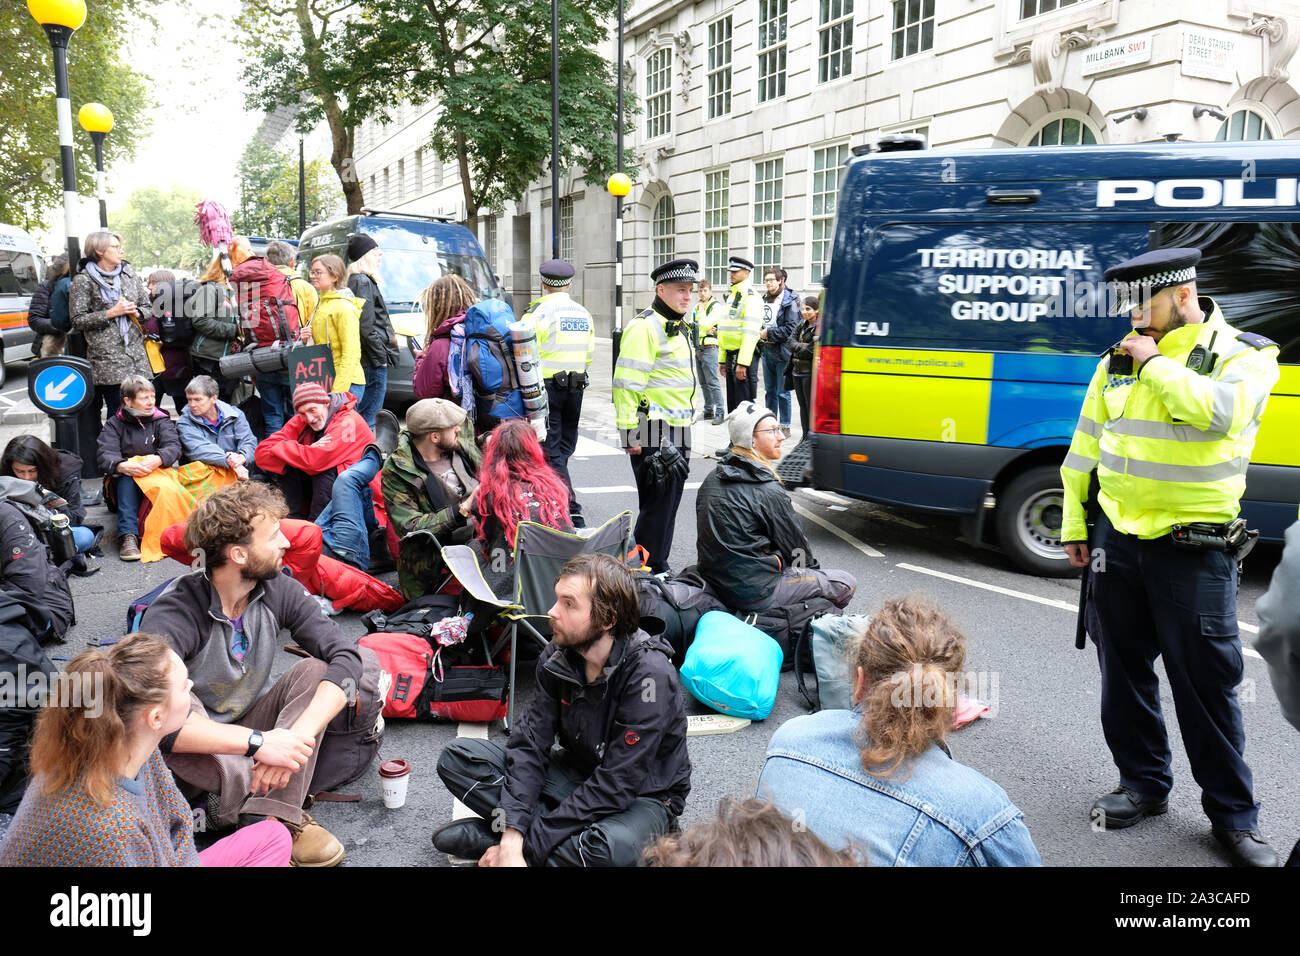 Westminster, London, UK - Monday 7th October 2019 - Extinction Rebellion XR climate protesters block roads around Westminster - Police officers watch protesters at Millbank near Parliament. Photo Steven May / Alamy Live News Stock Photo